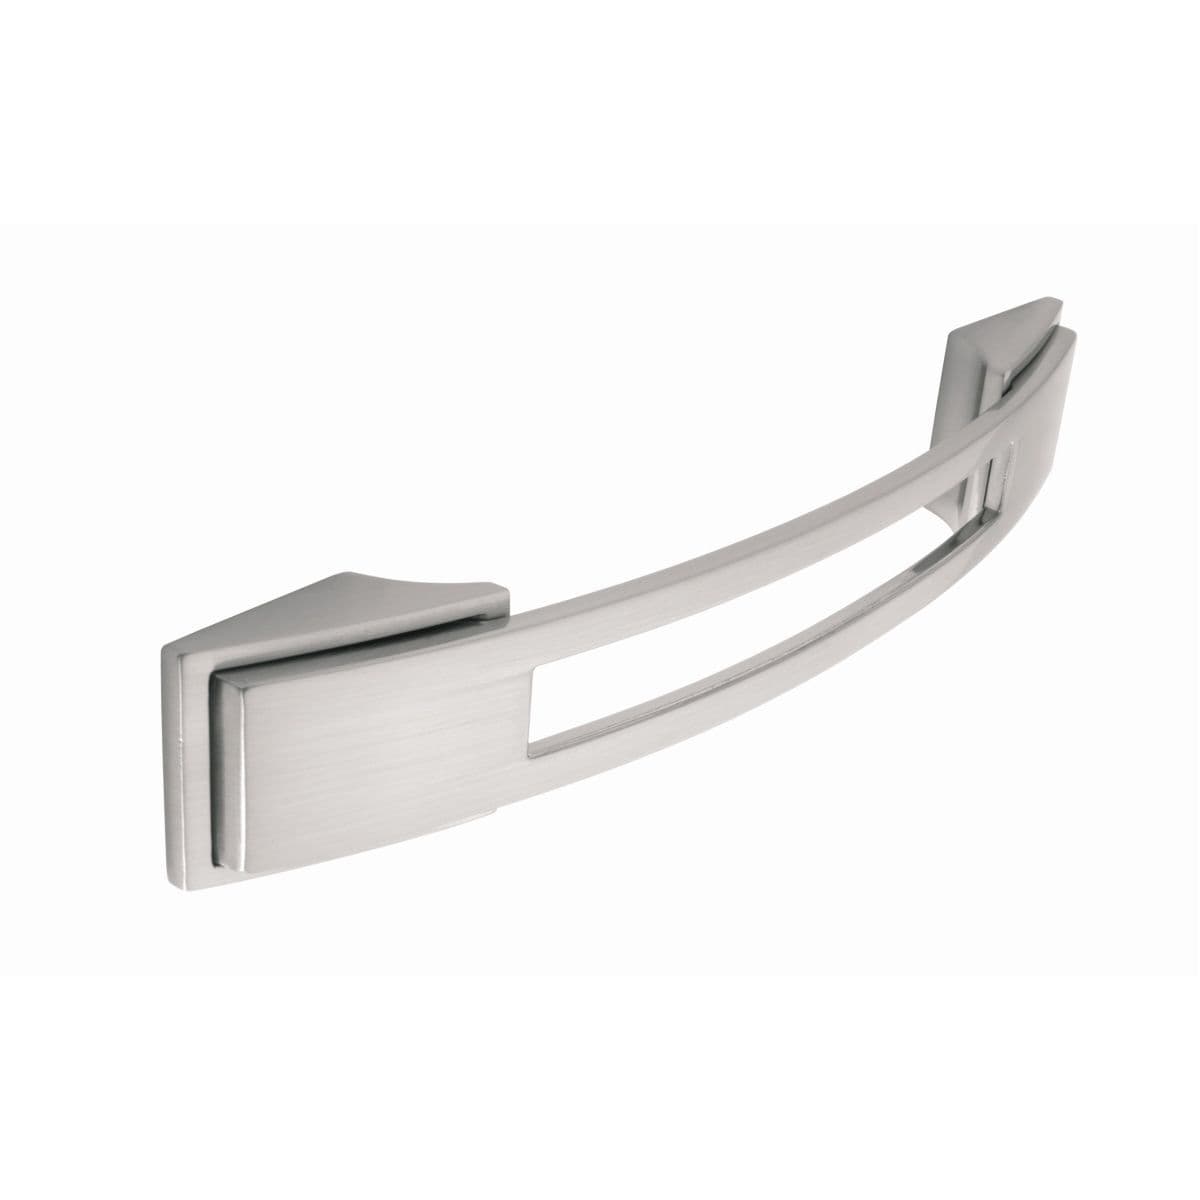 BOWES SQUARE BOW Cupboard Handle - 128mm h/c size - BRUSHED S/STEEL EFFECT finish (PWS H589.128.SS)